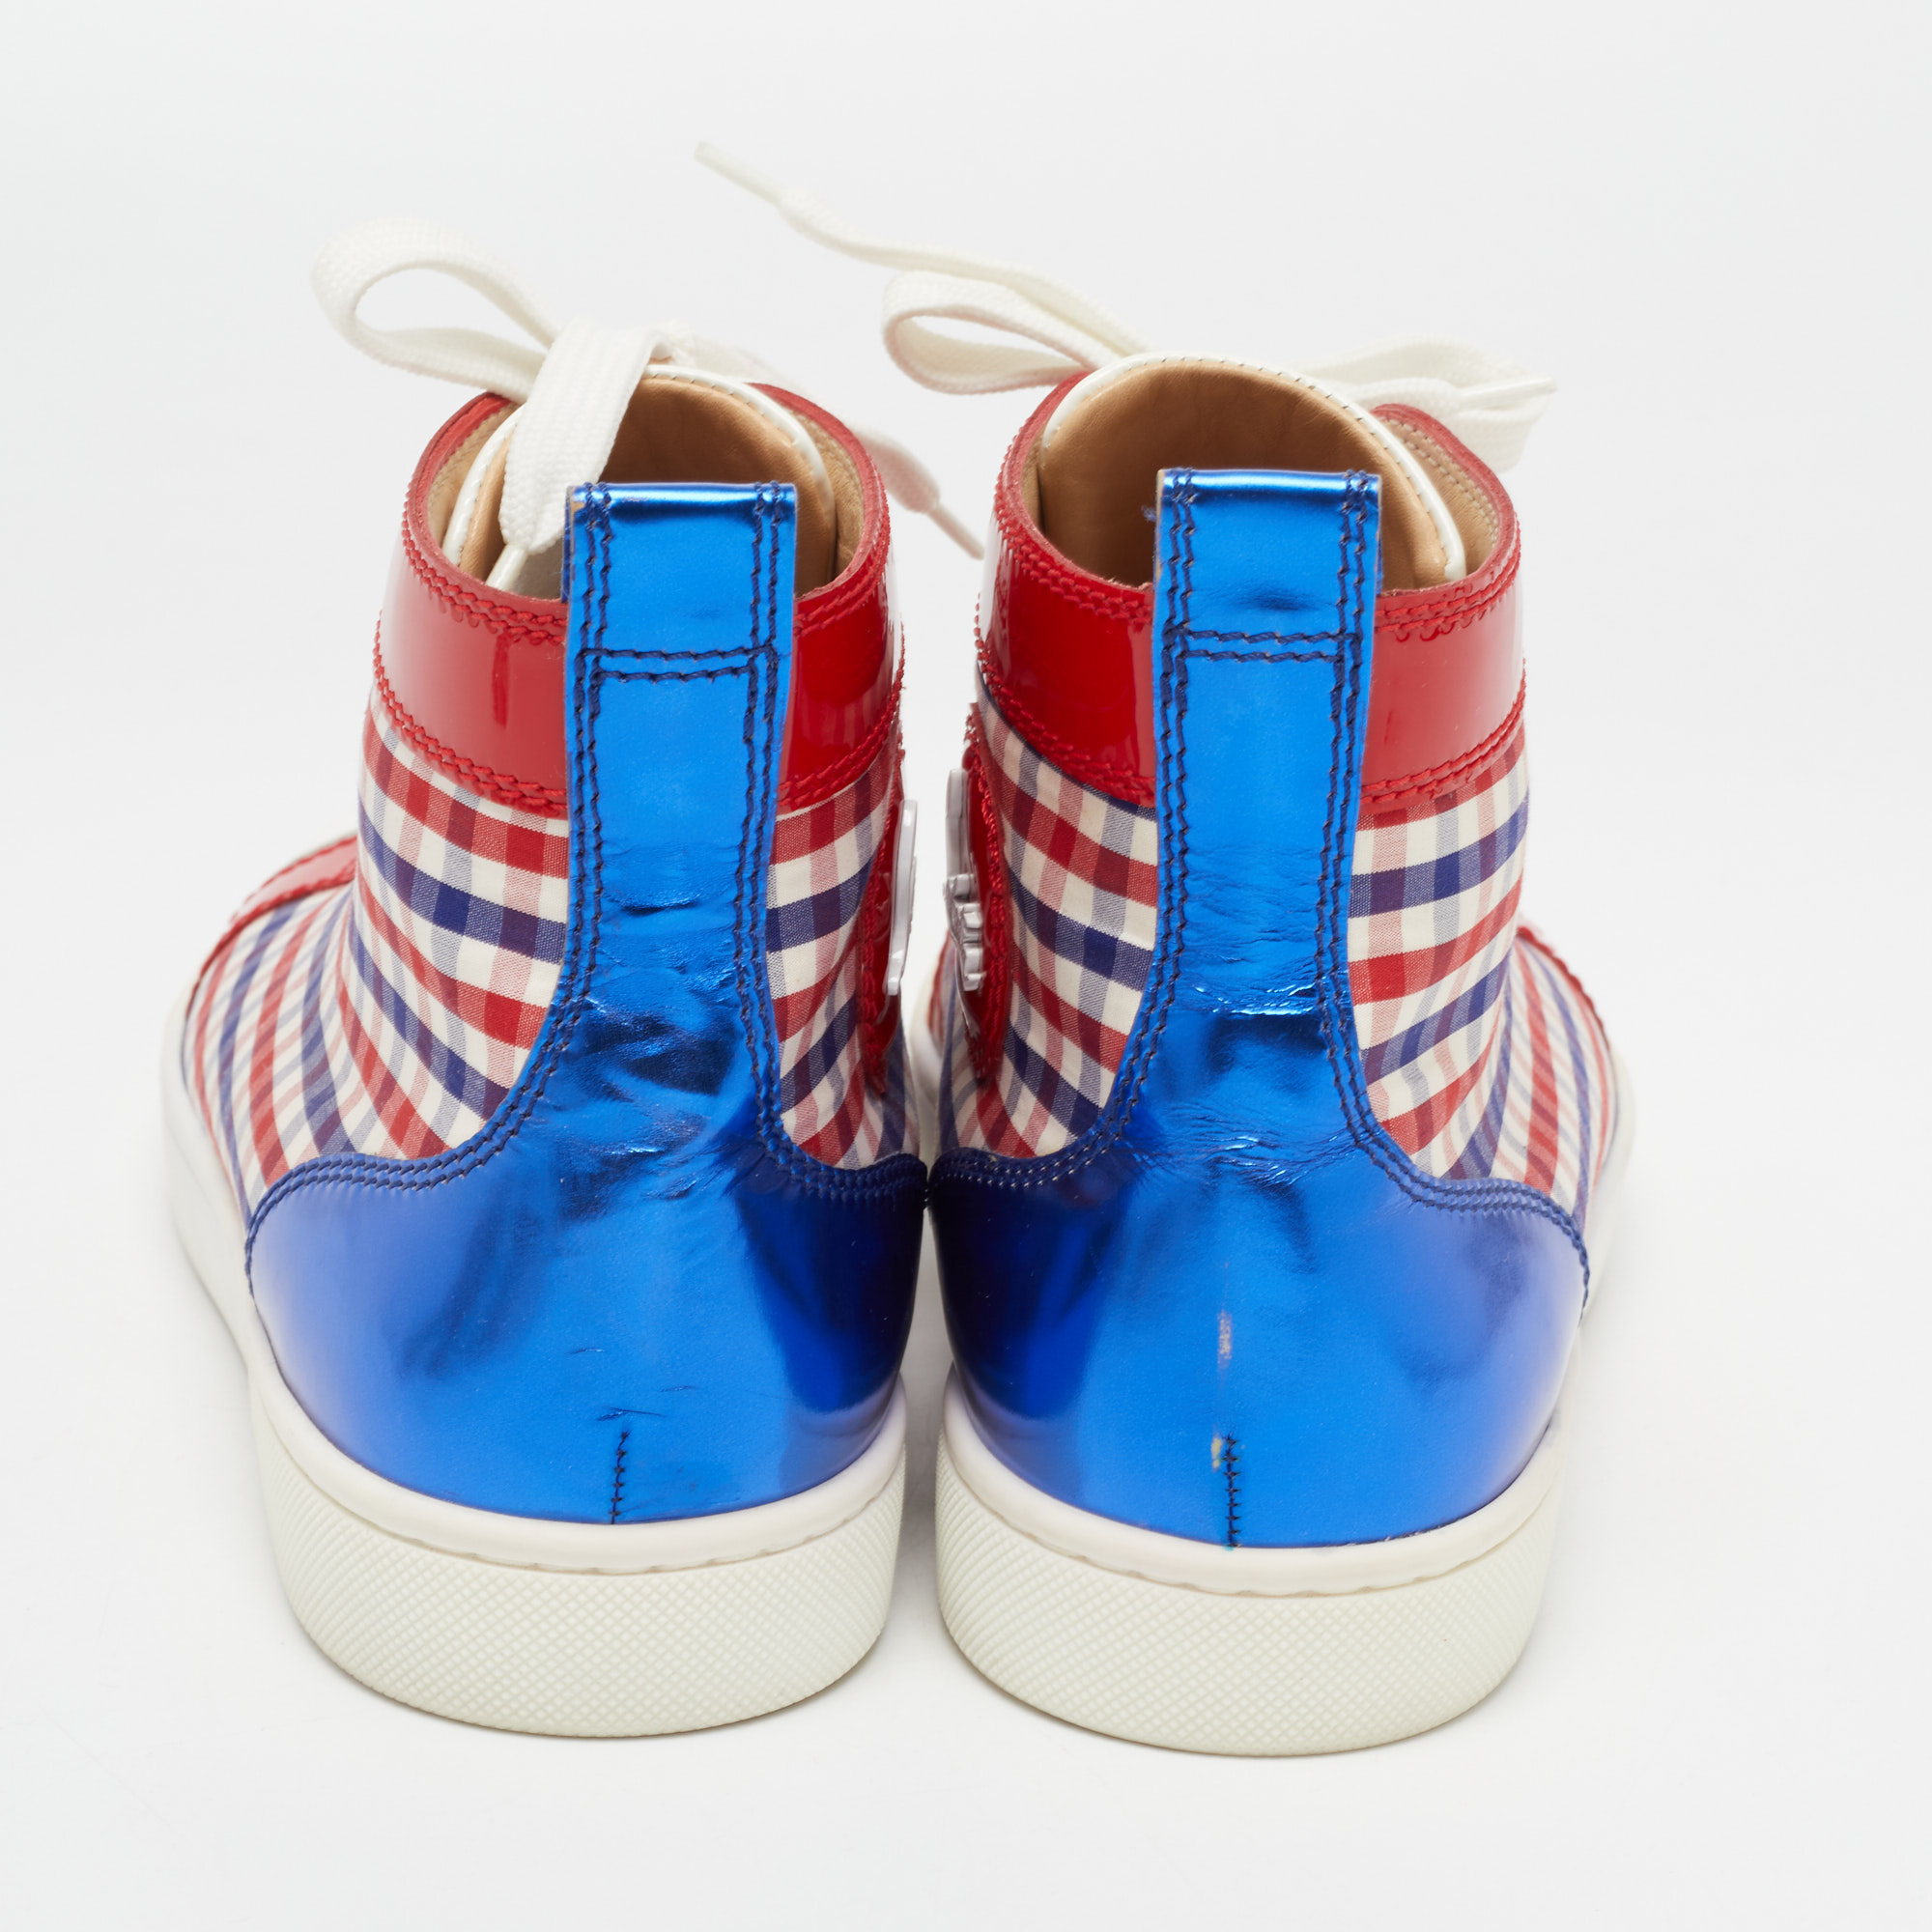 Christian Louboutin Tricolor Patent Leather And Plaid Fabric Louis High Top Sneakers Size 40